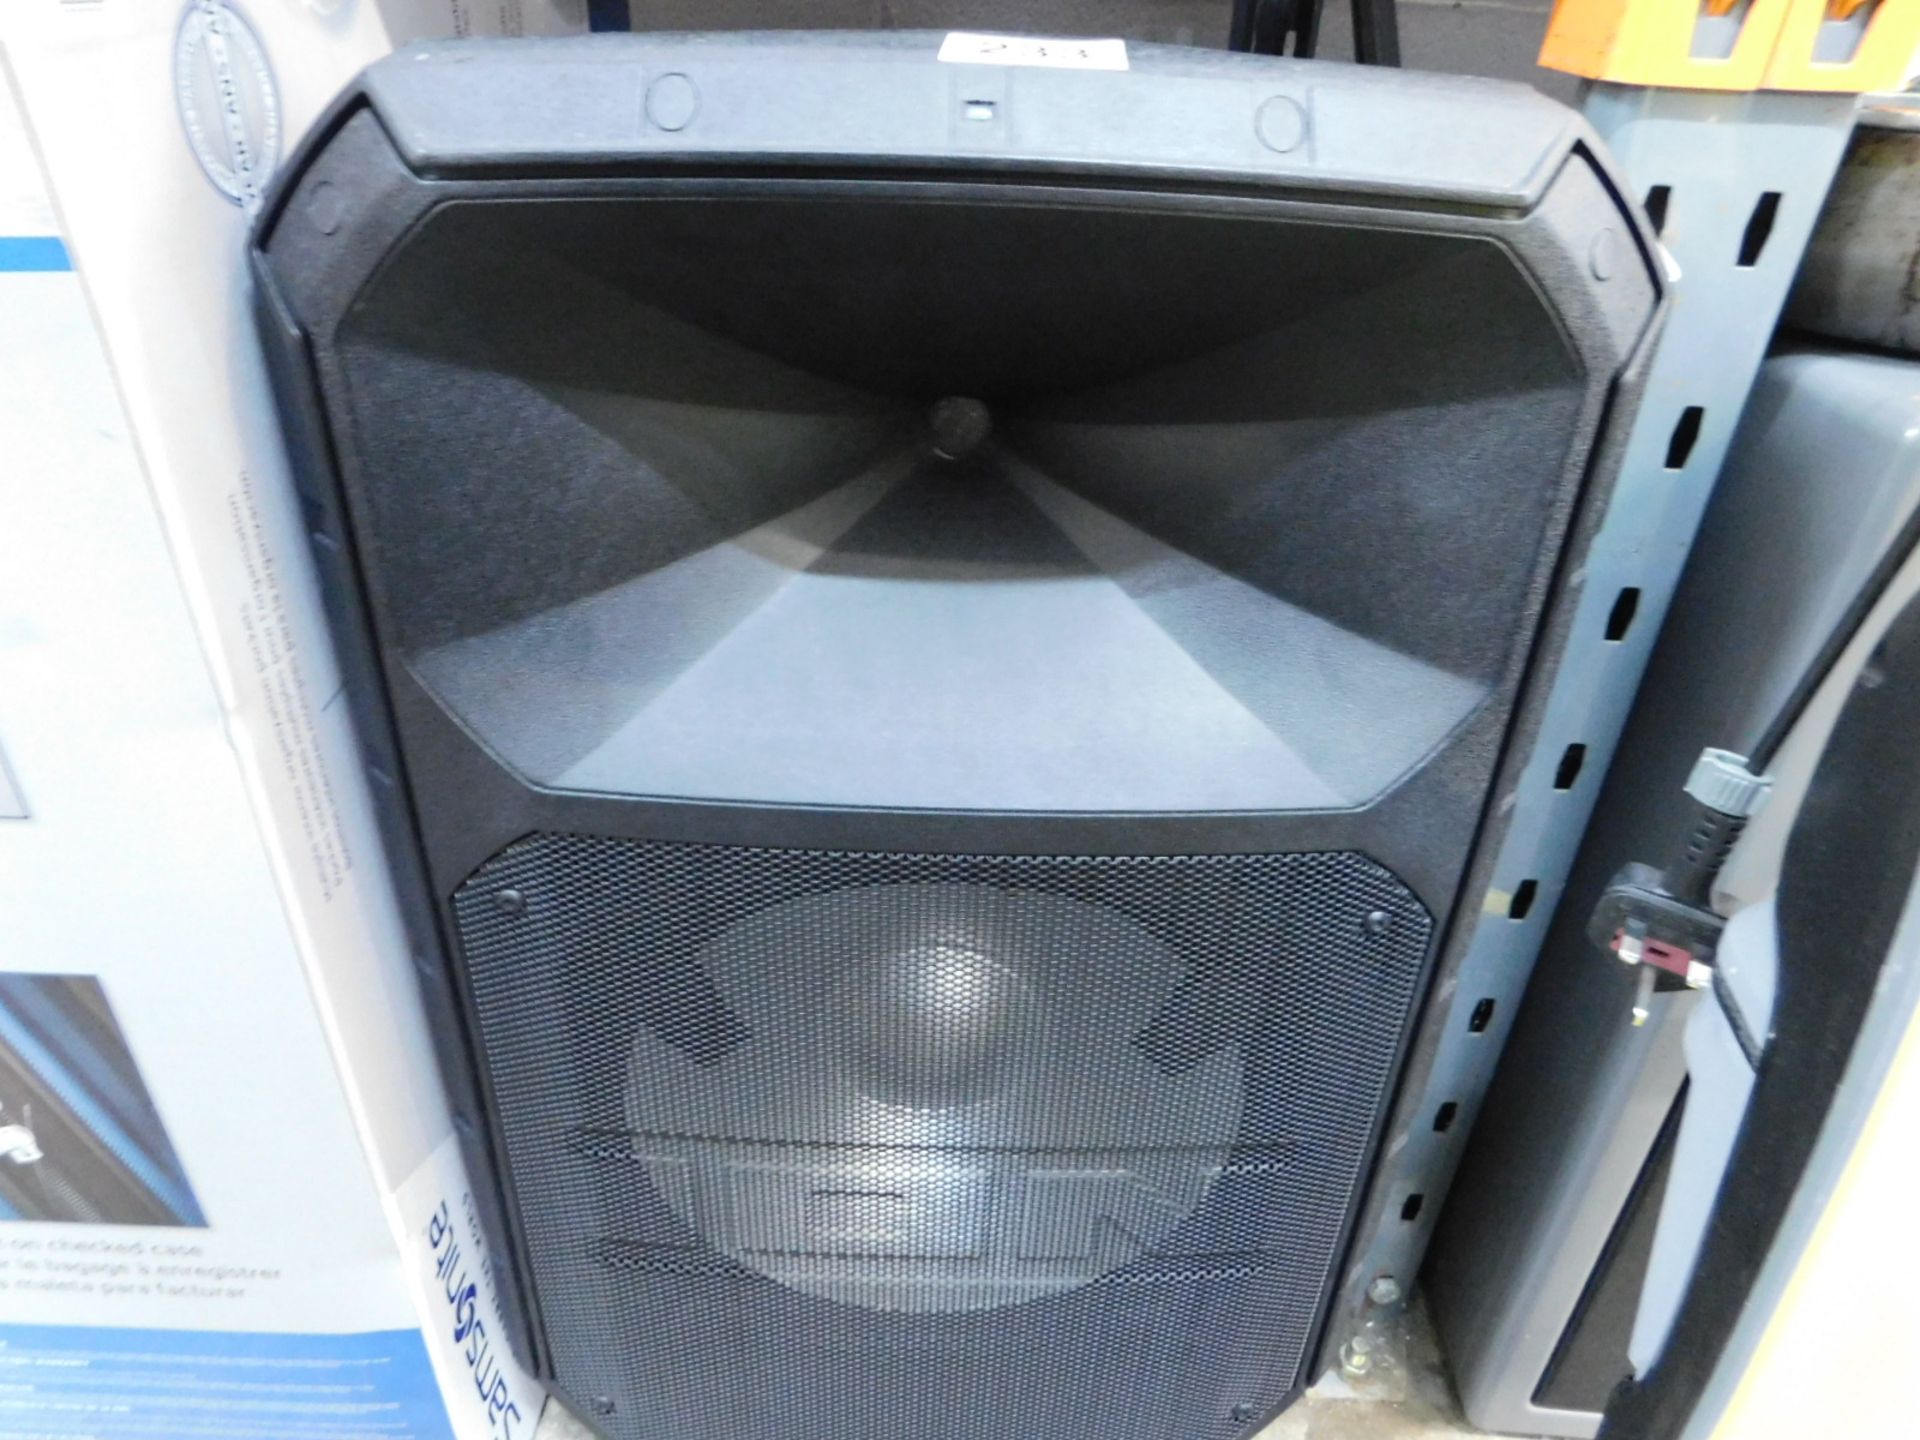 1 ION TOTAL PA MAX 500W BI-AMPLIFIED ALL-IN-ONE SPEAKER SYSTEM WITH STAND & MICROPHONE RRP Â£299